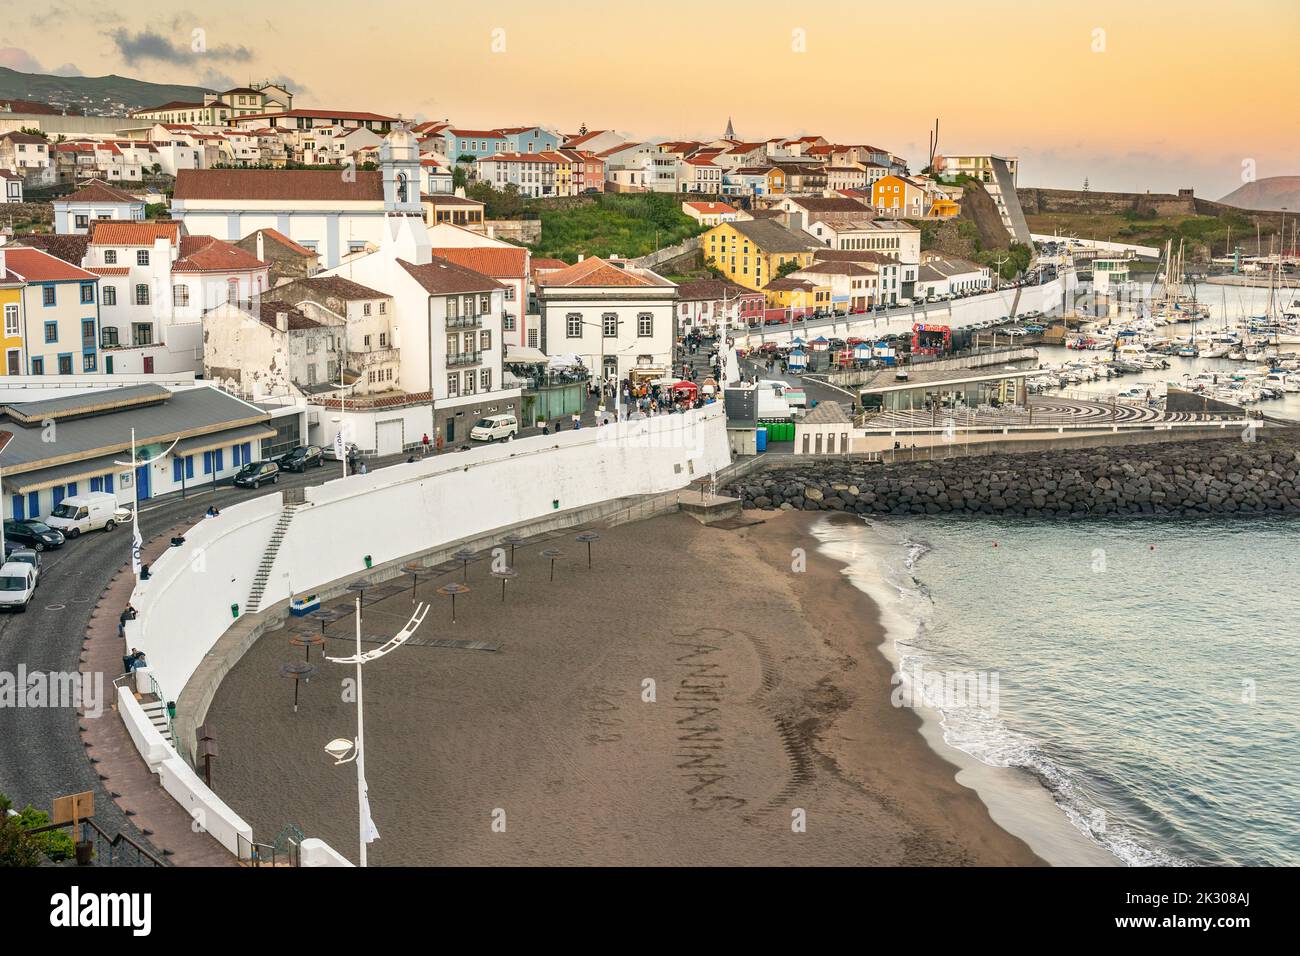 City view of the public beach called the Praia de Angra do Heroismo at sunset in the historic city centre of Angra do Heroismo, Terceira Island, Azores, Portugal. Stock Photo